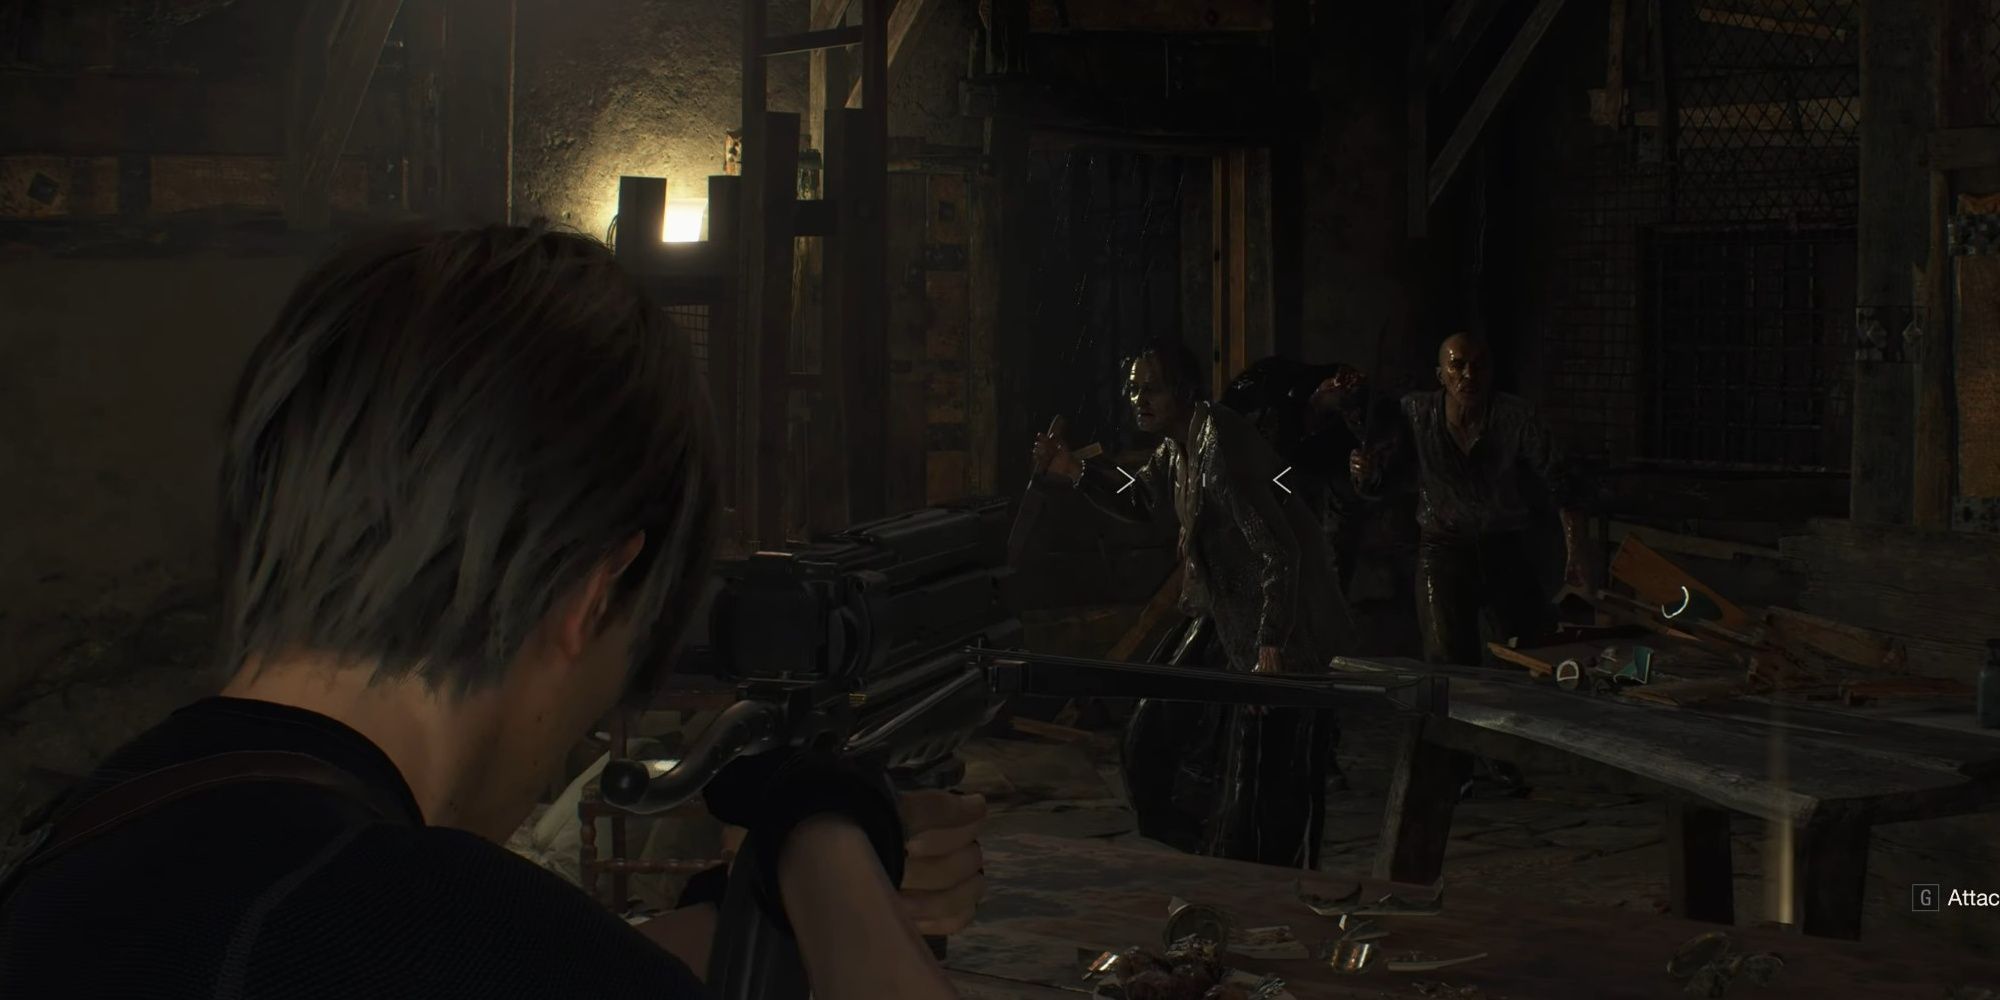 Review: “Resident Evil 4” Remake Exceeds Over-the-top Expectations